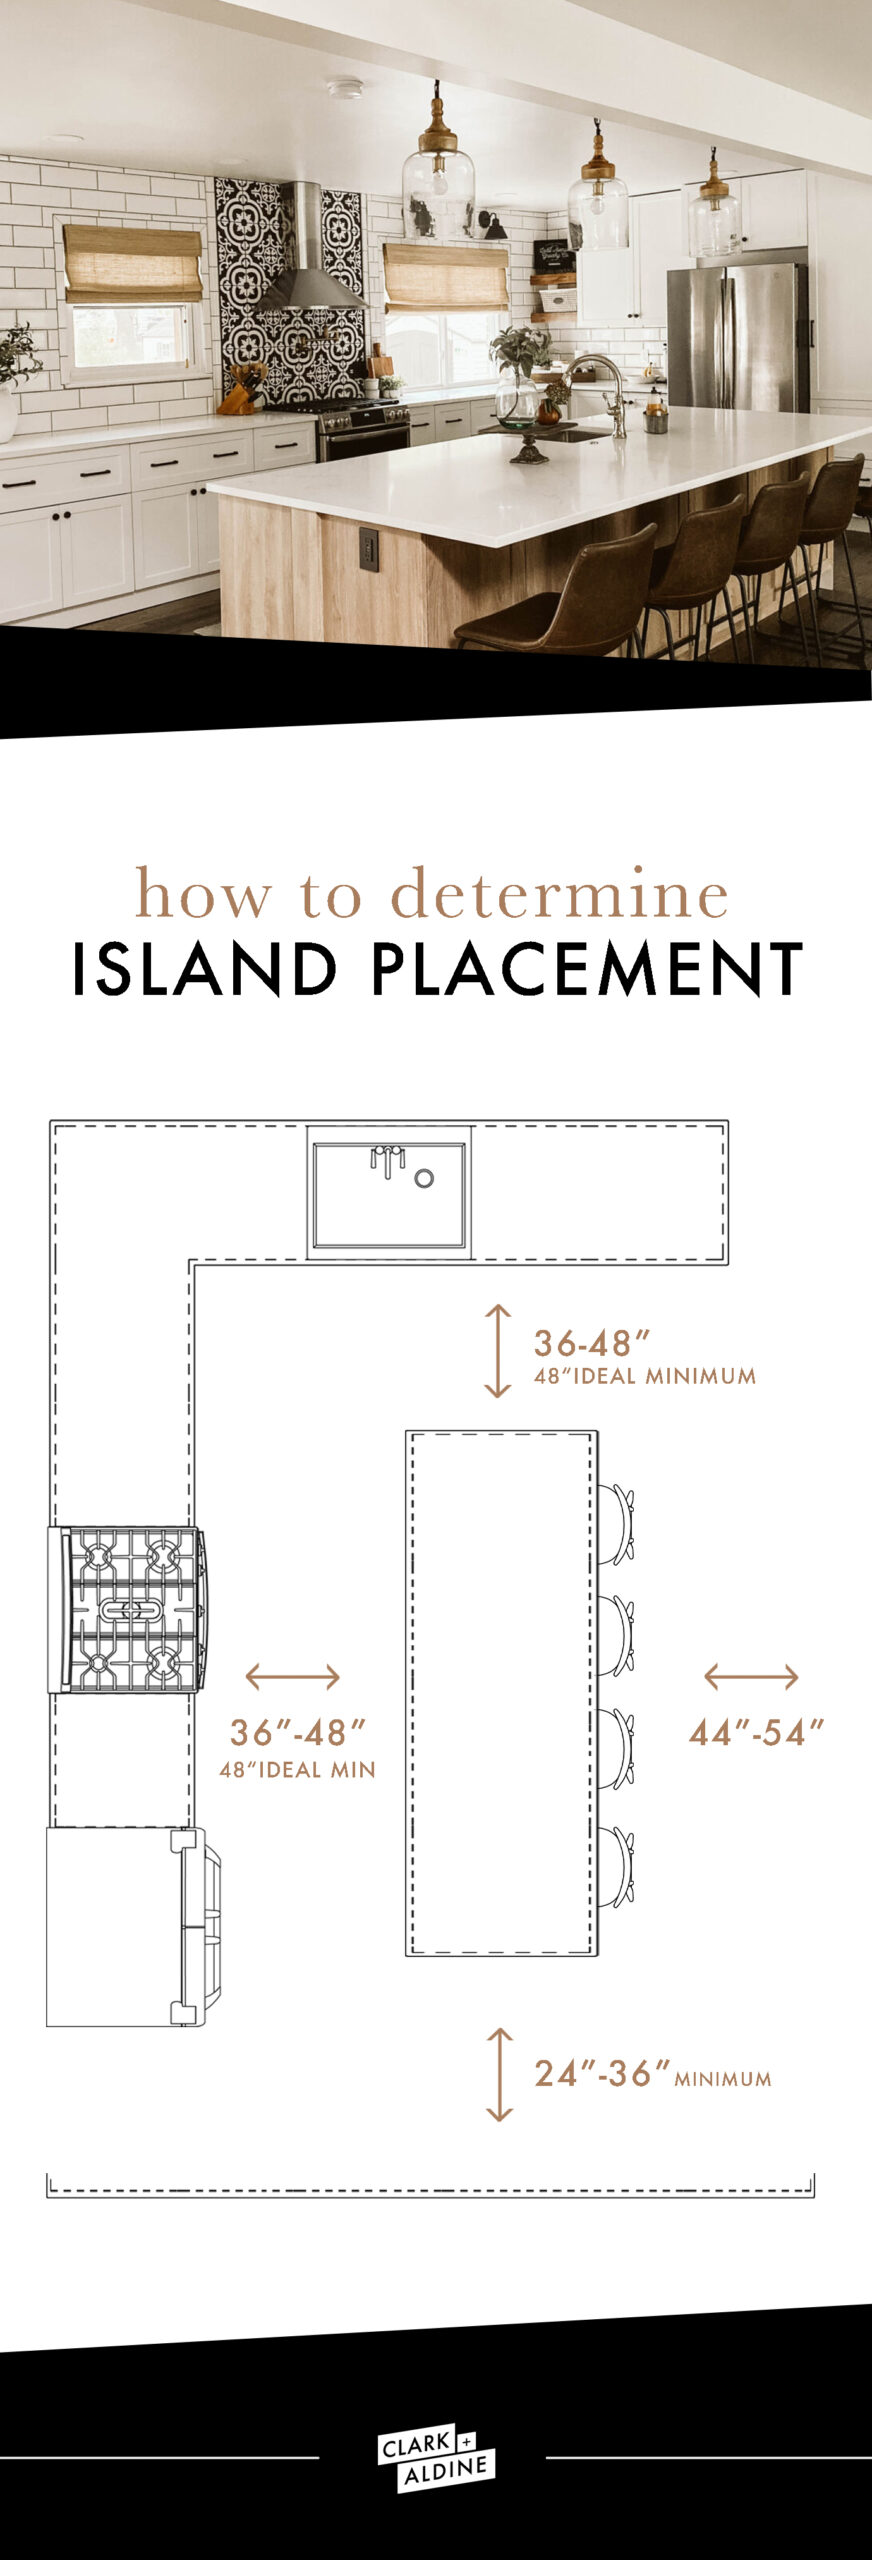 Kitchen Island Placement, How Much Space Do You Need Between Island And Cabinets